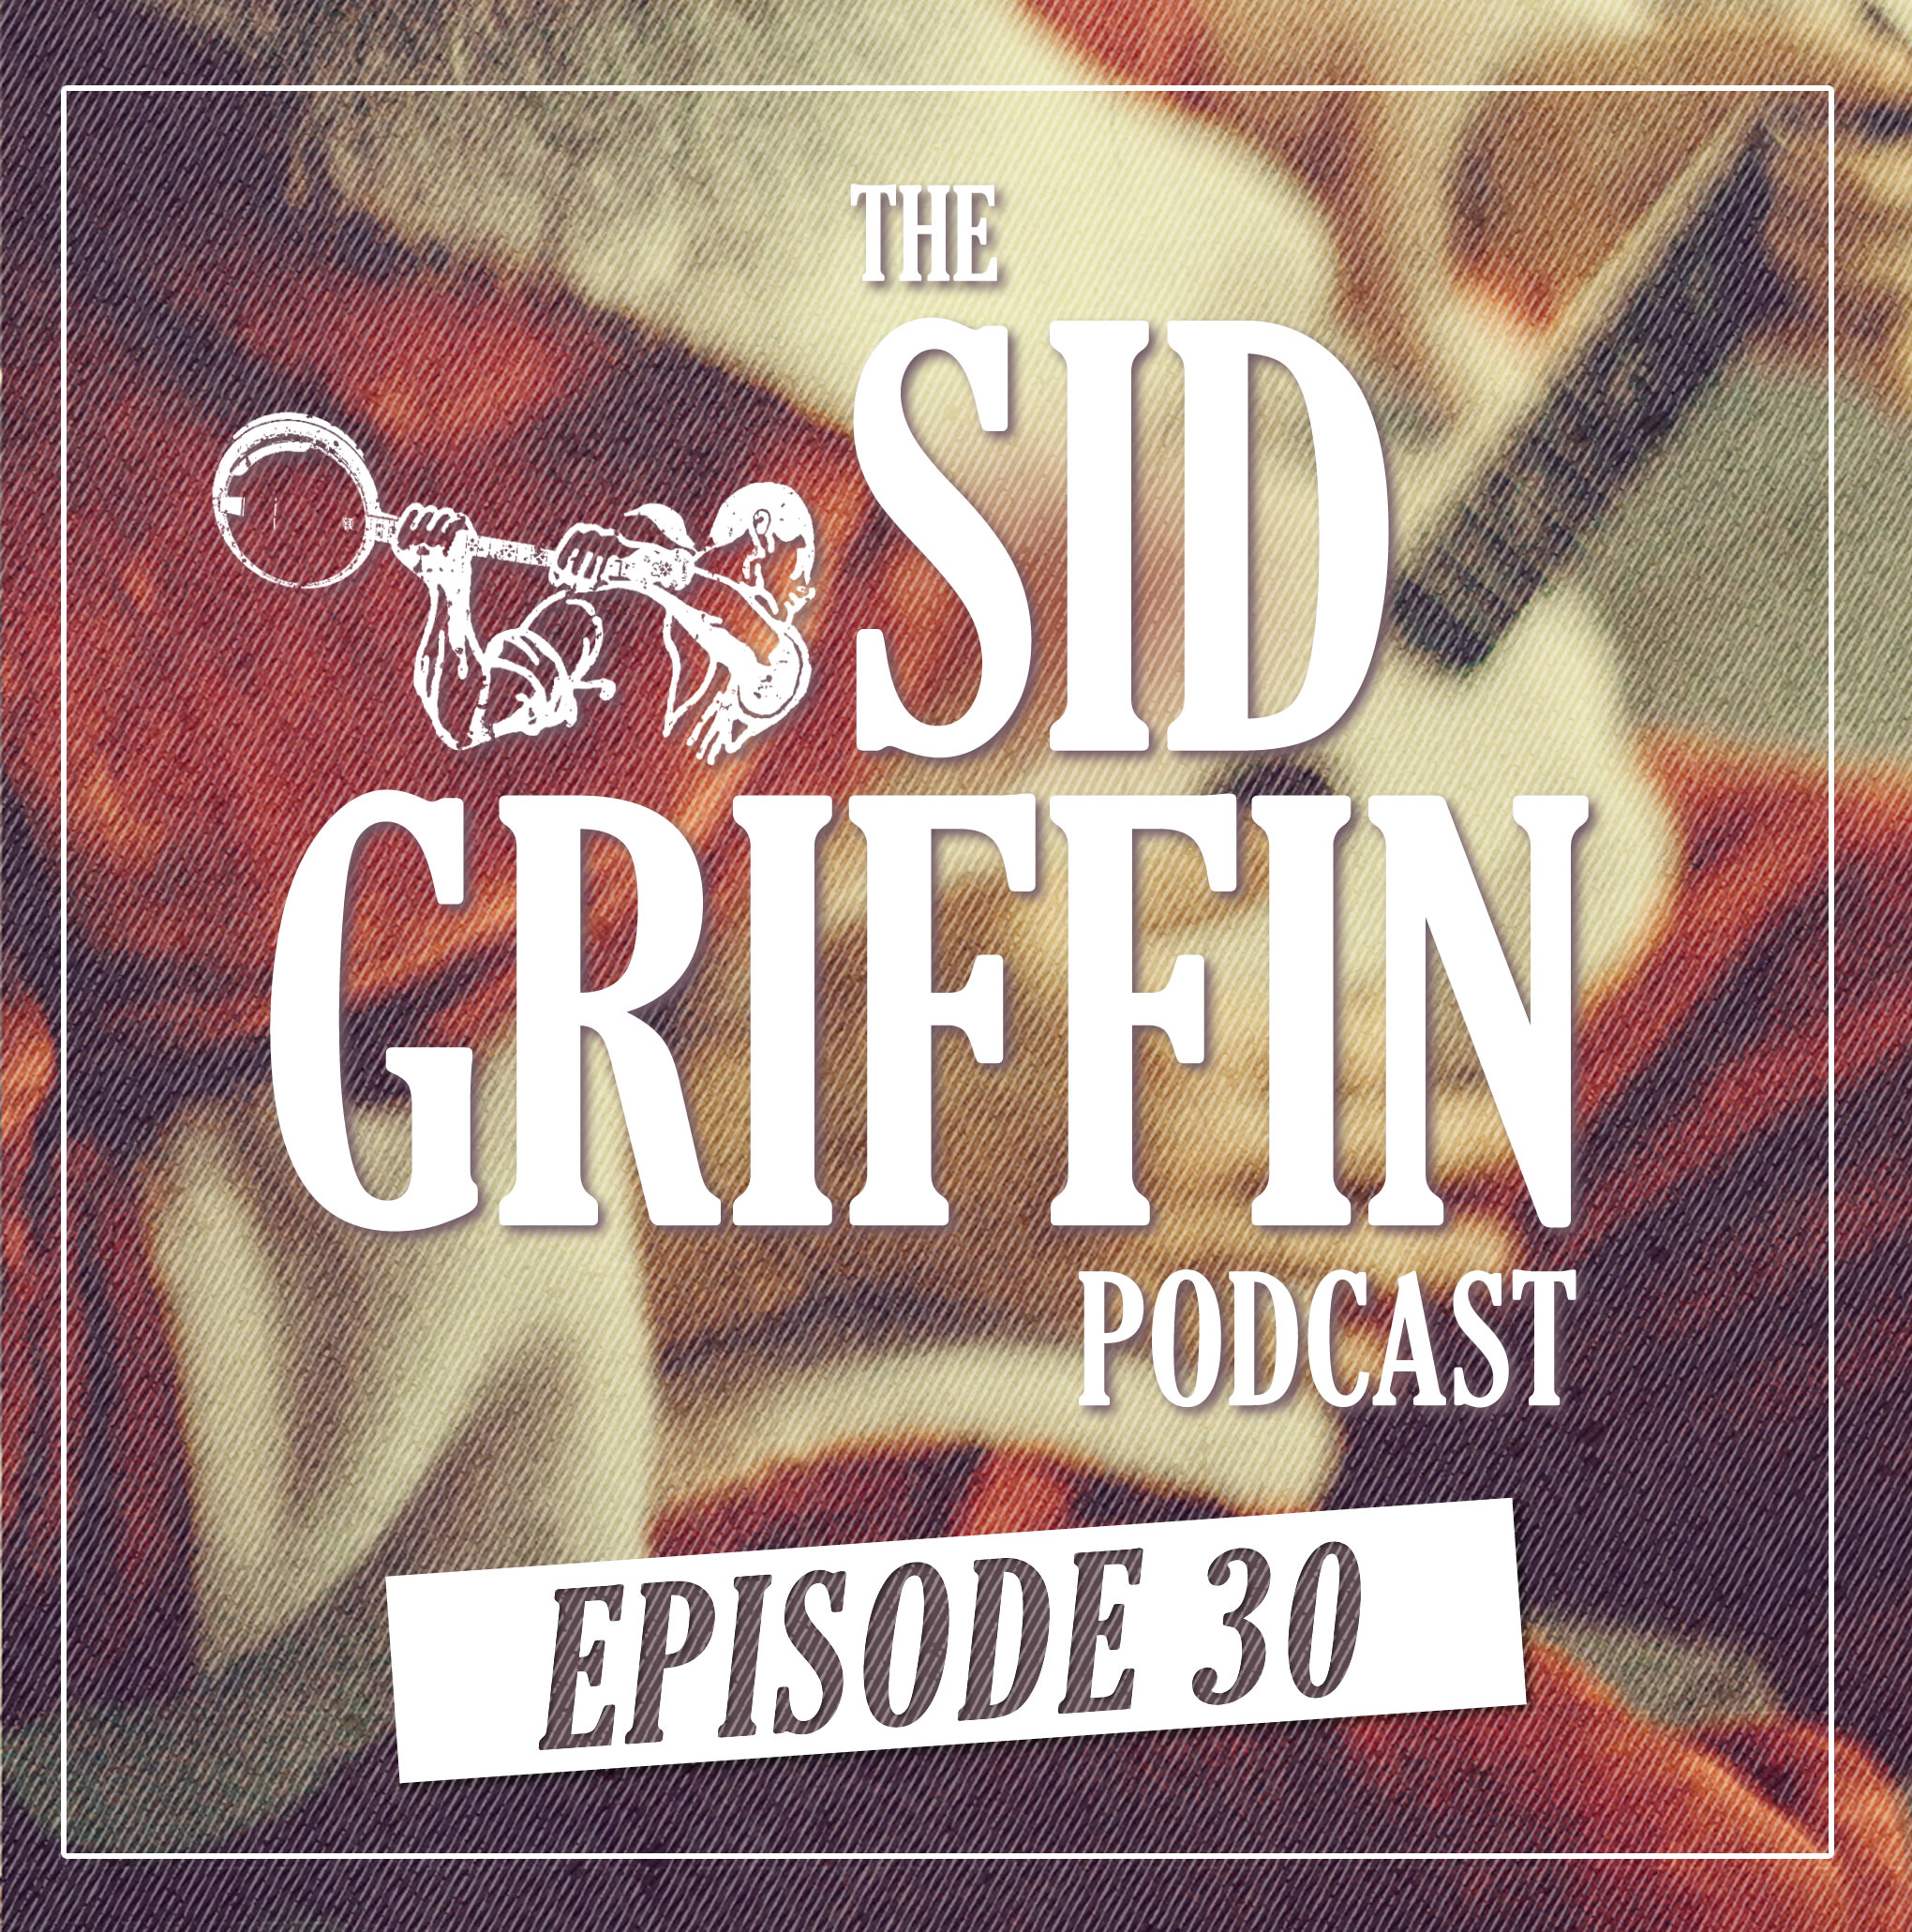 The Sid Griffin Podcast - Call All Coal Porters - Show 30